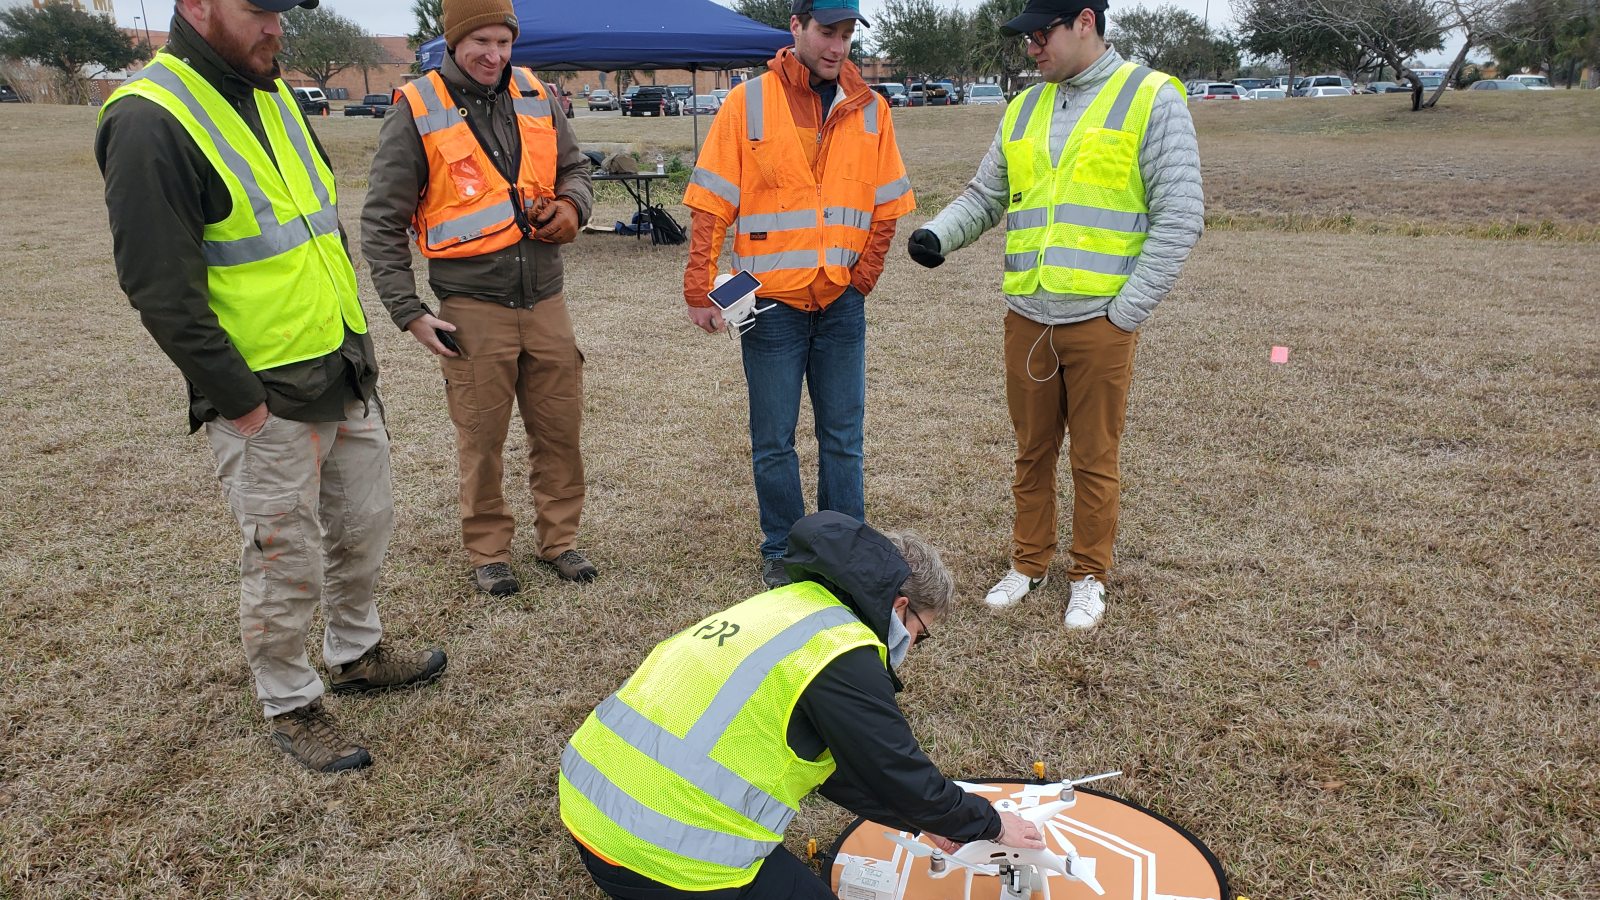 Group of GIS students getting the drone set to start the obstacle course.